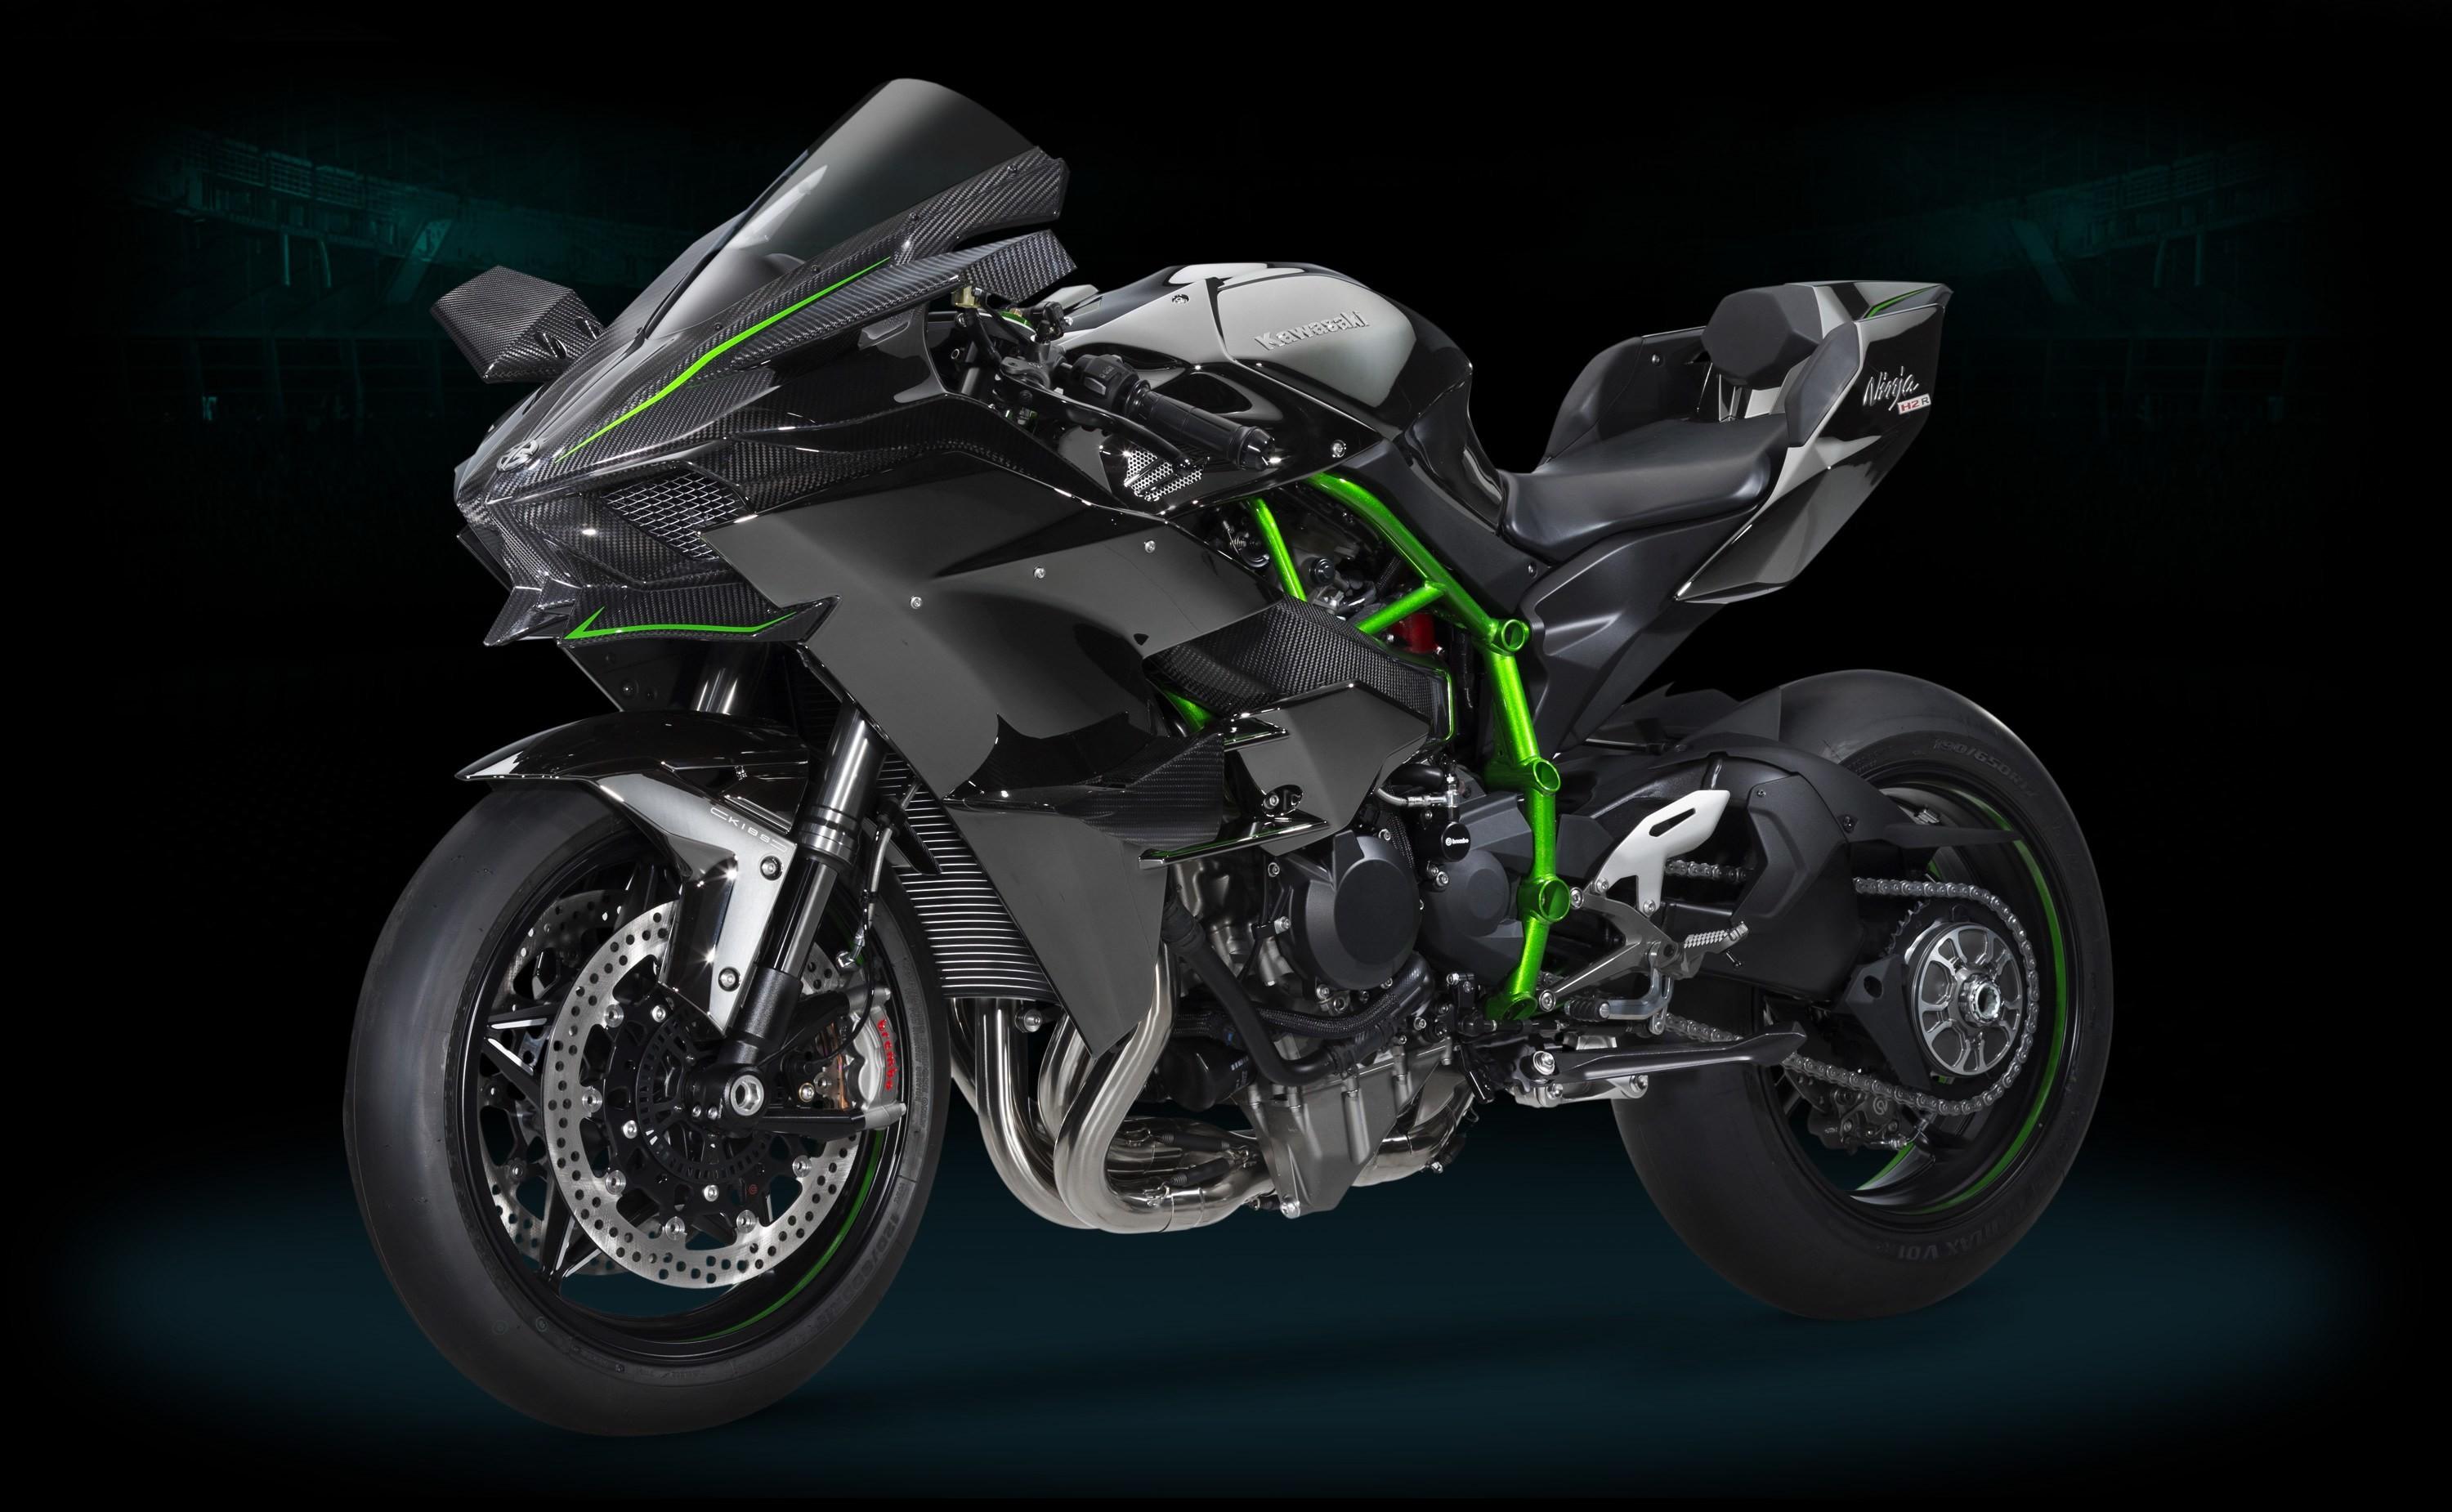 The Ninja H2R Wallpaper background picture